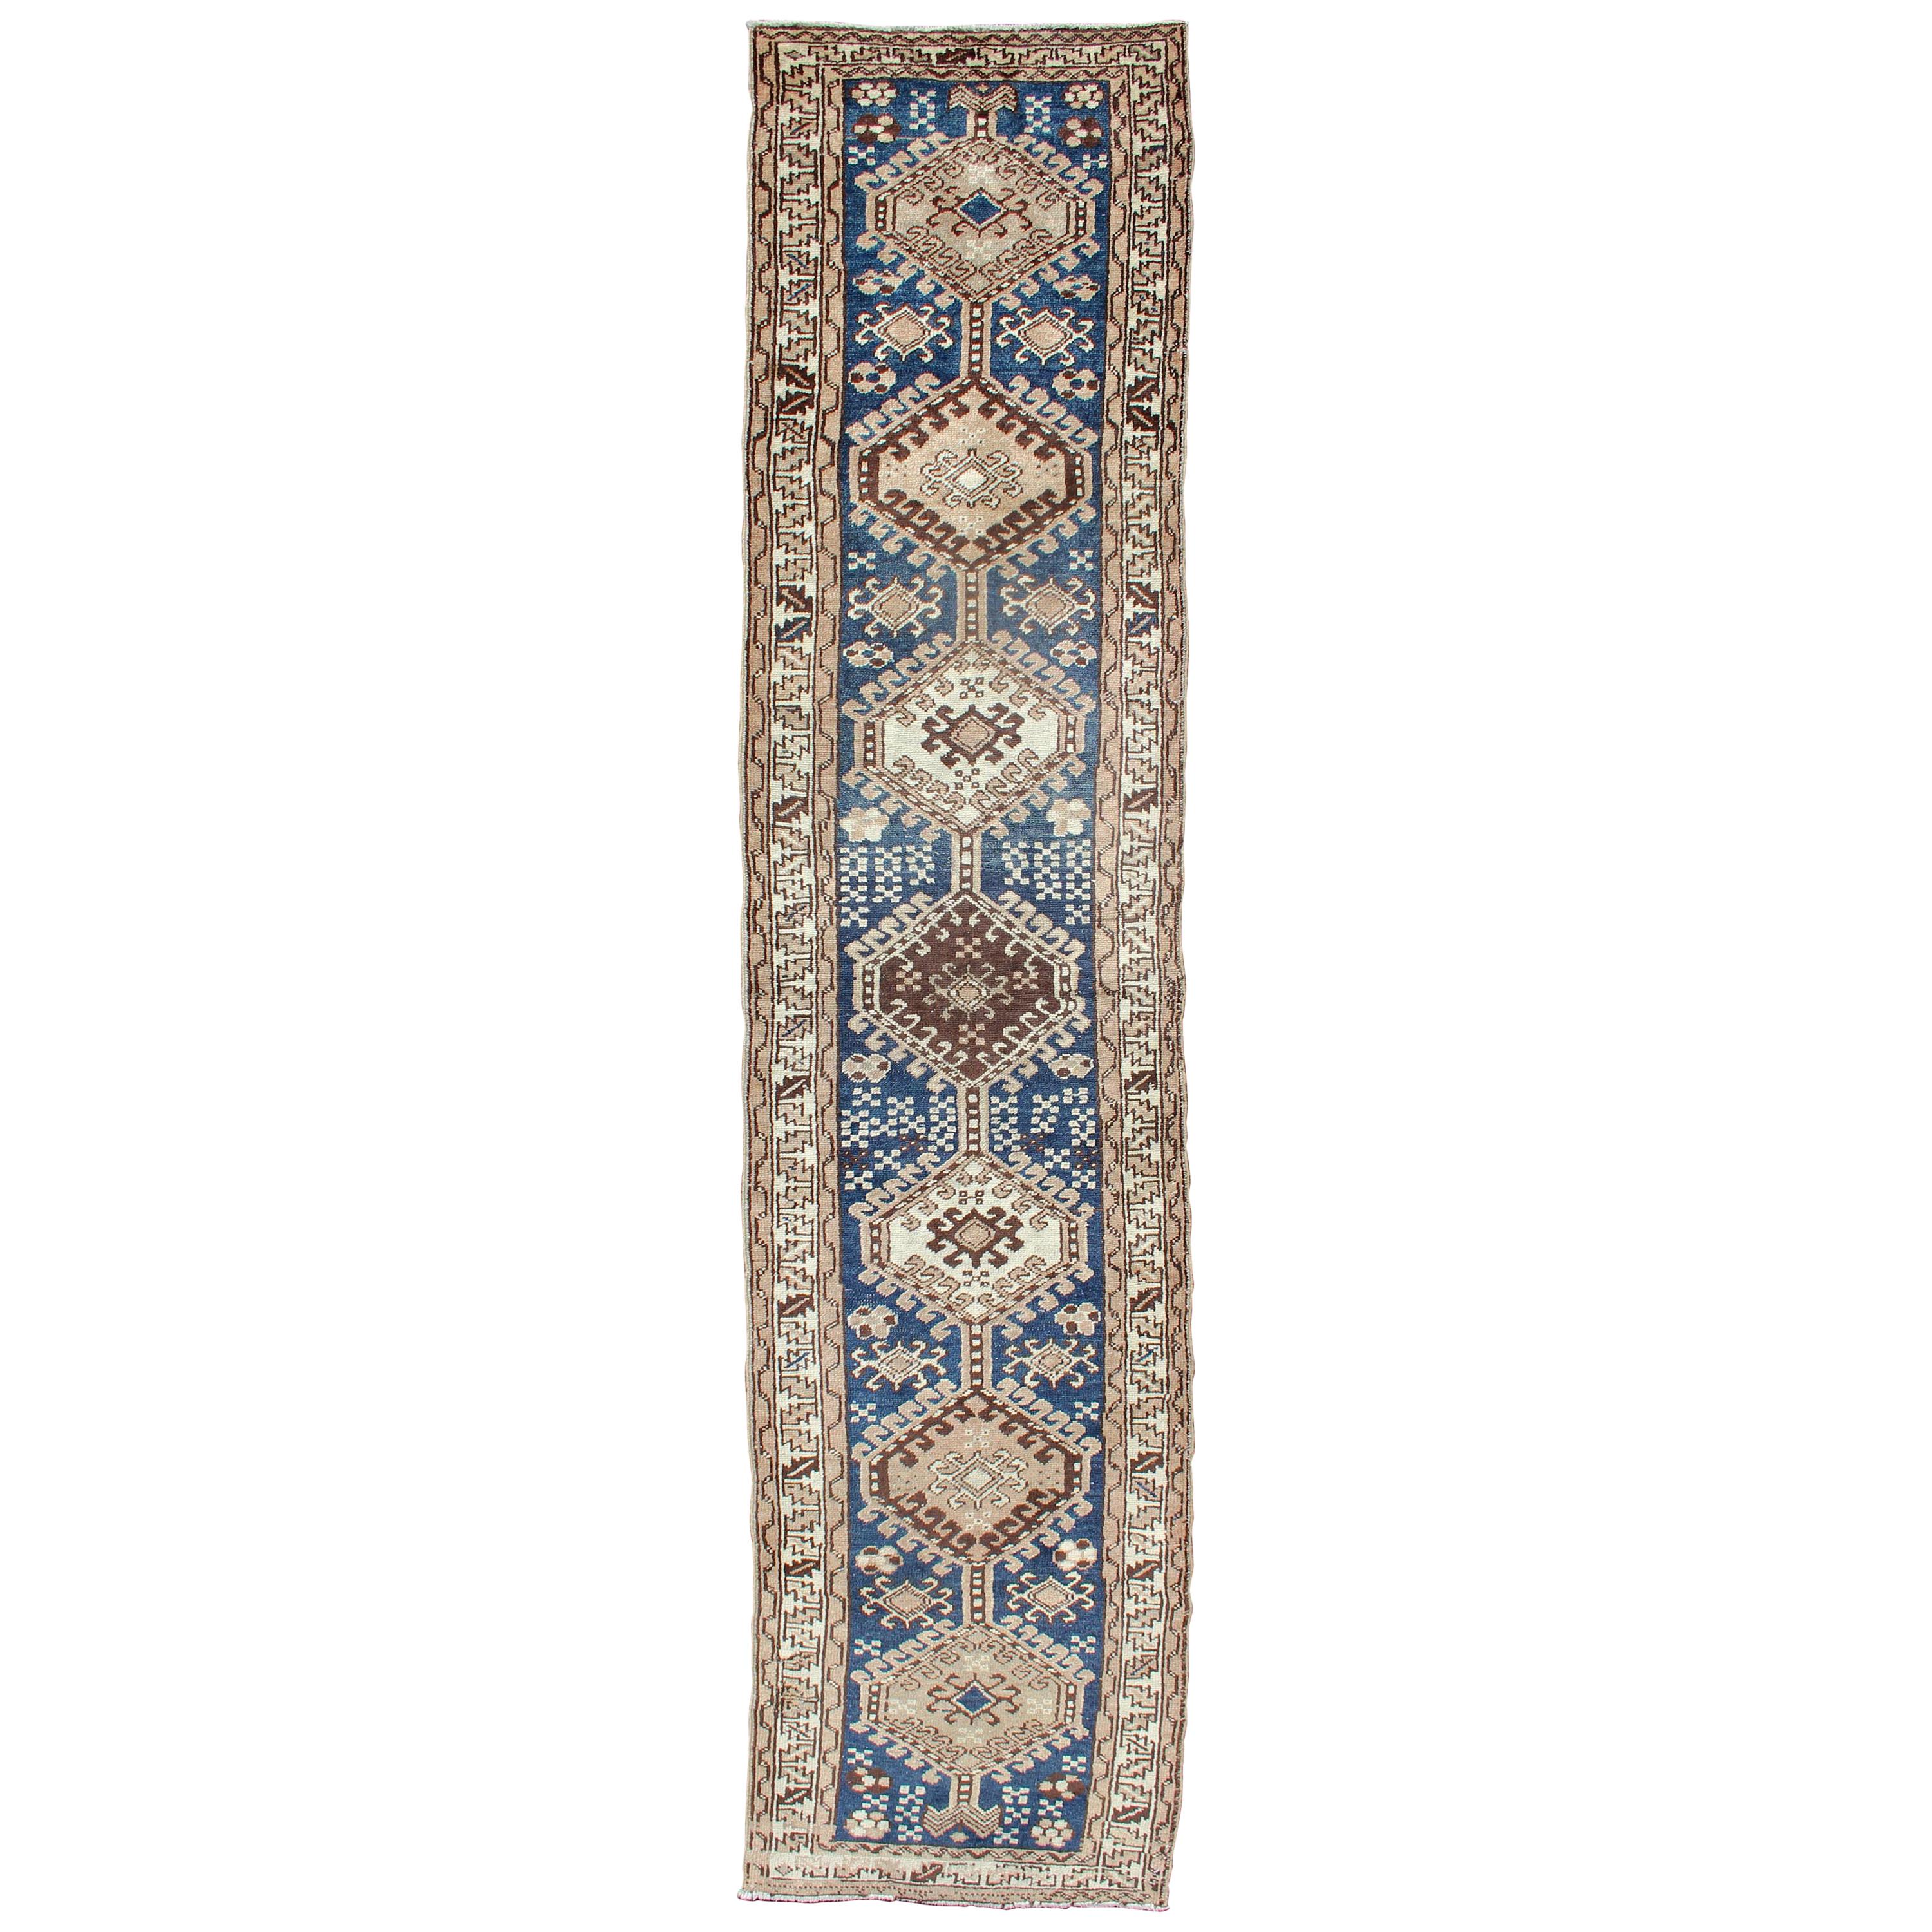 Antique Blue Tribal Karajeh Runner With Navy Blue, Brown and Earth Tones For Sale